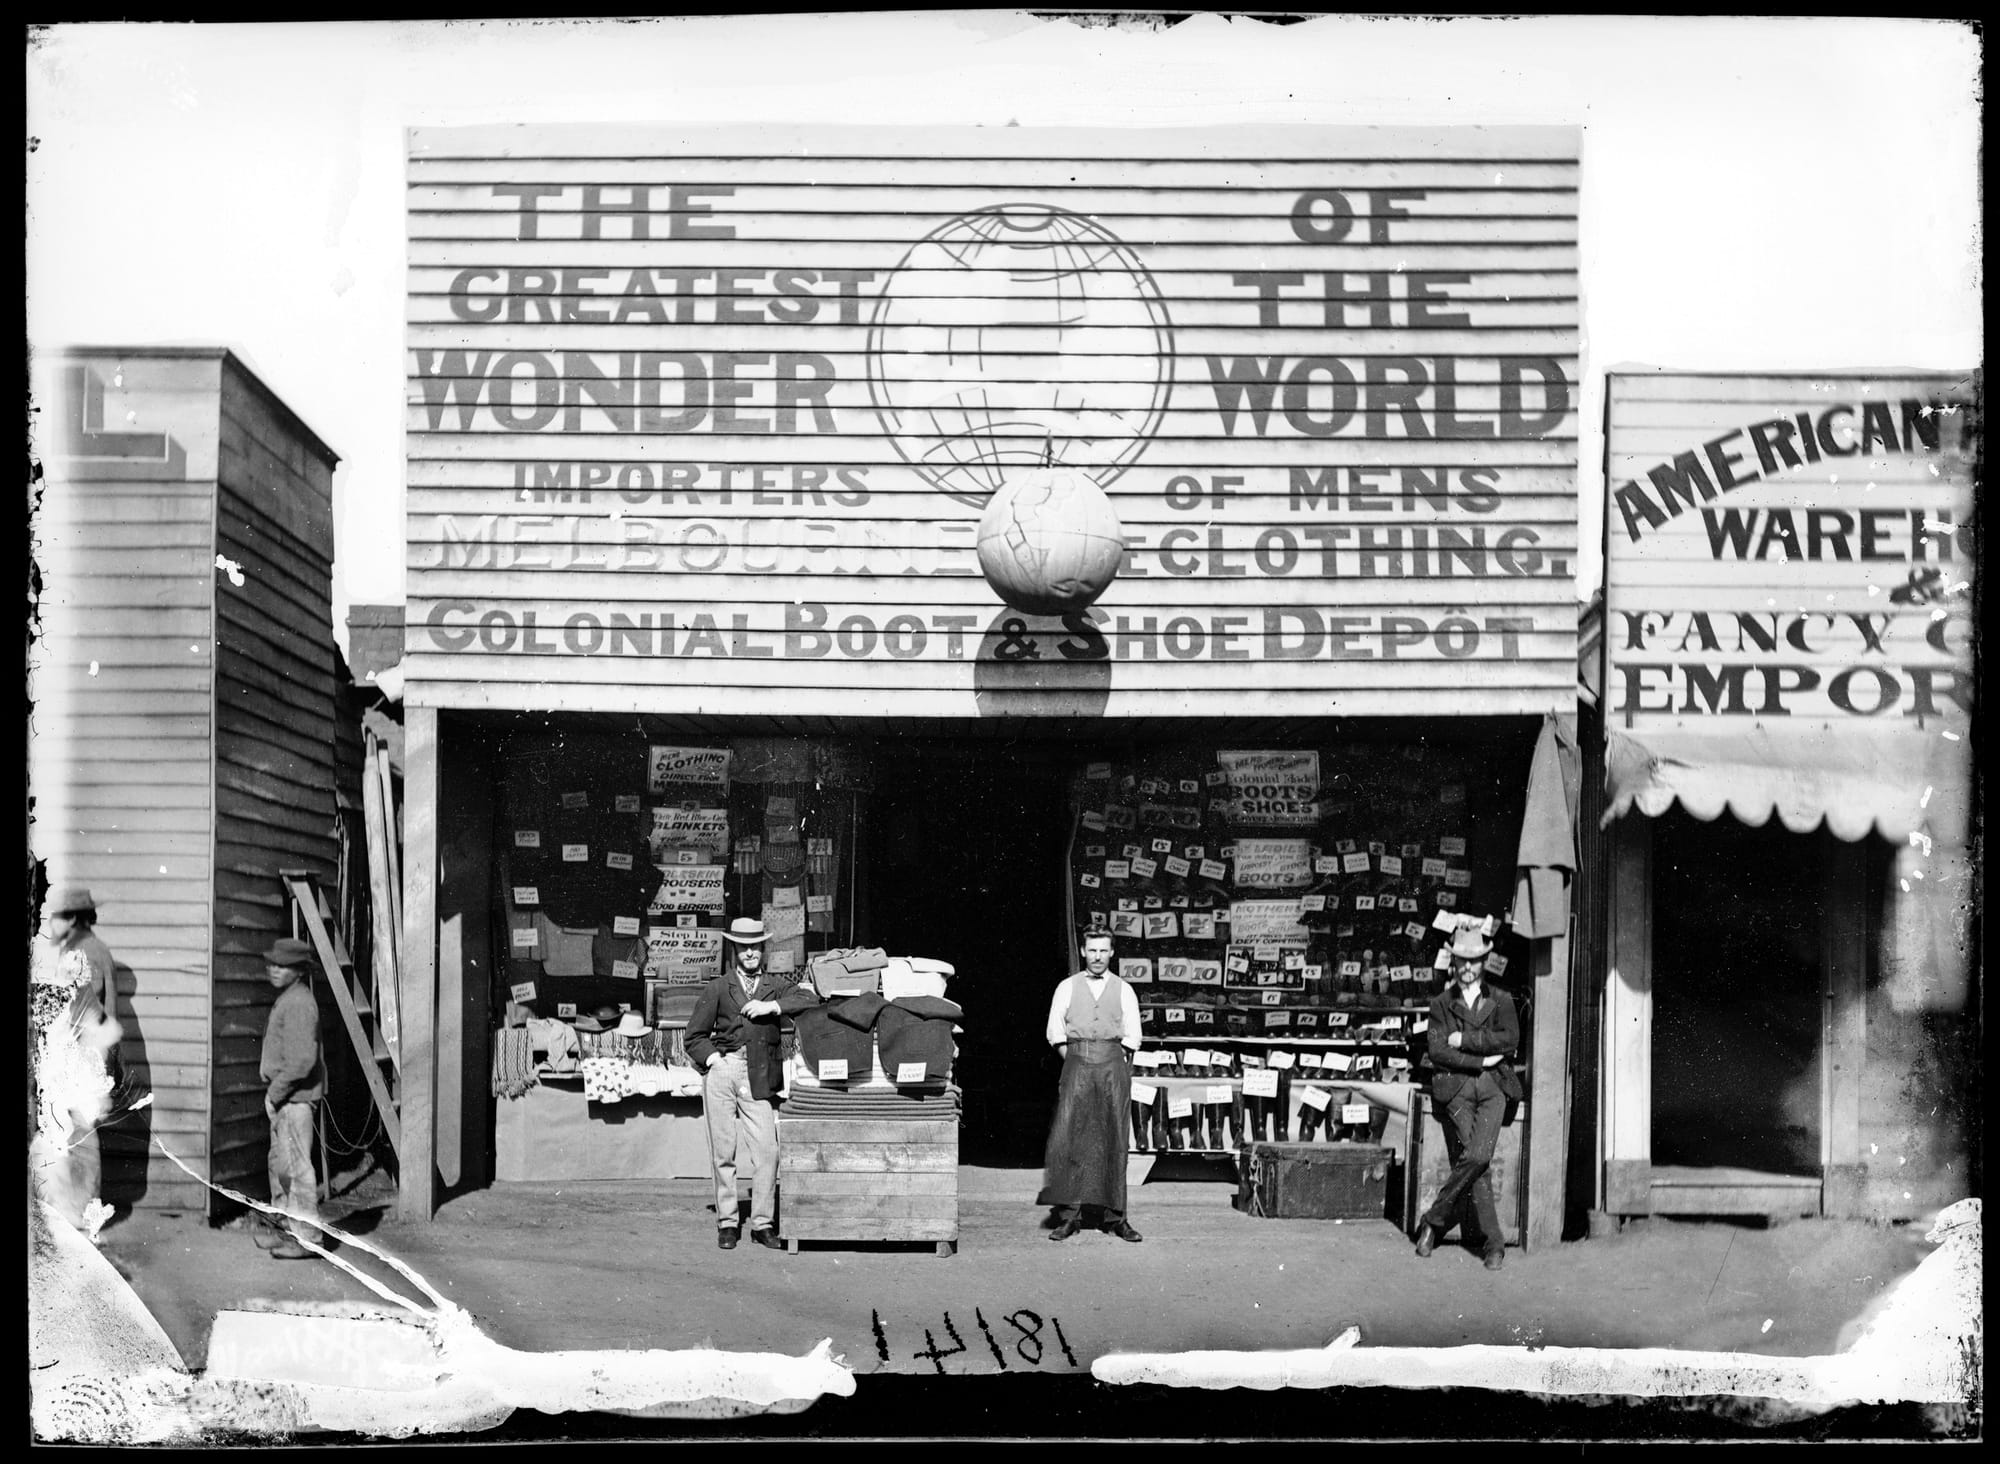 People posing for a photo in front of a show and clothing shop with an oversized fascia sign that reads 'the greatest wonder of the world'.